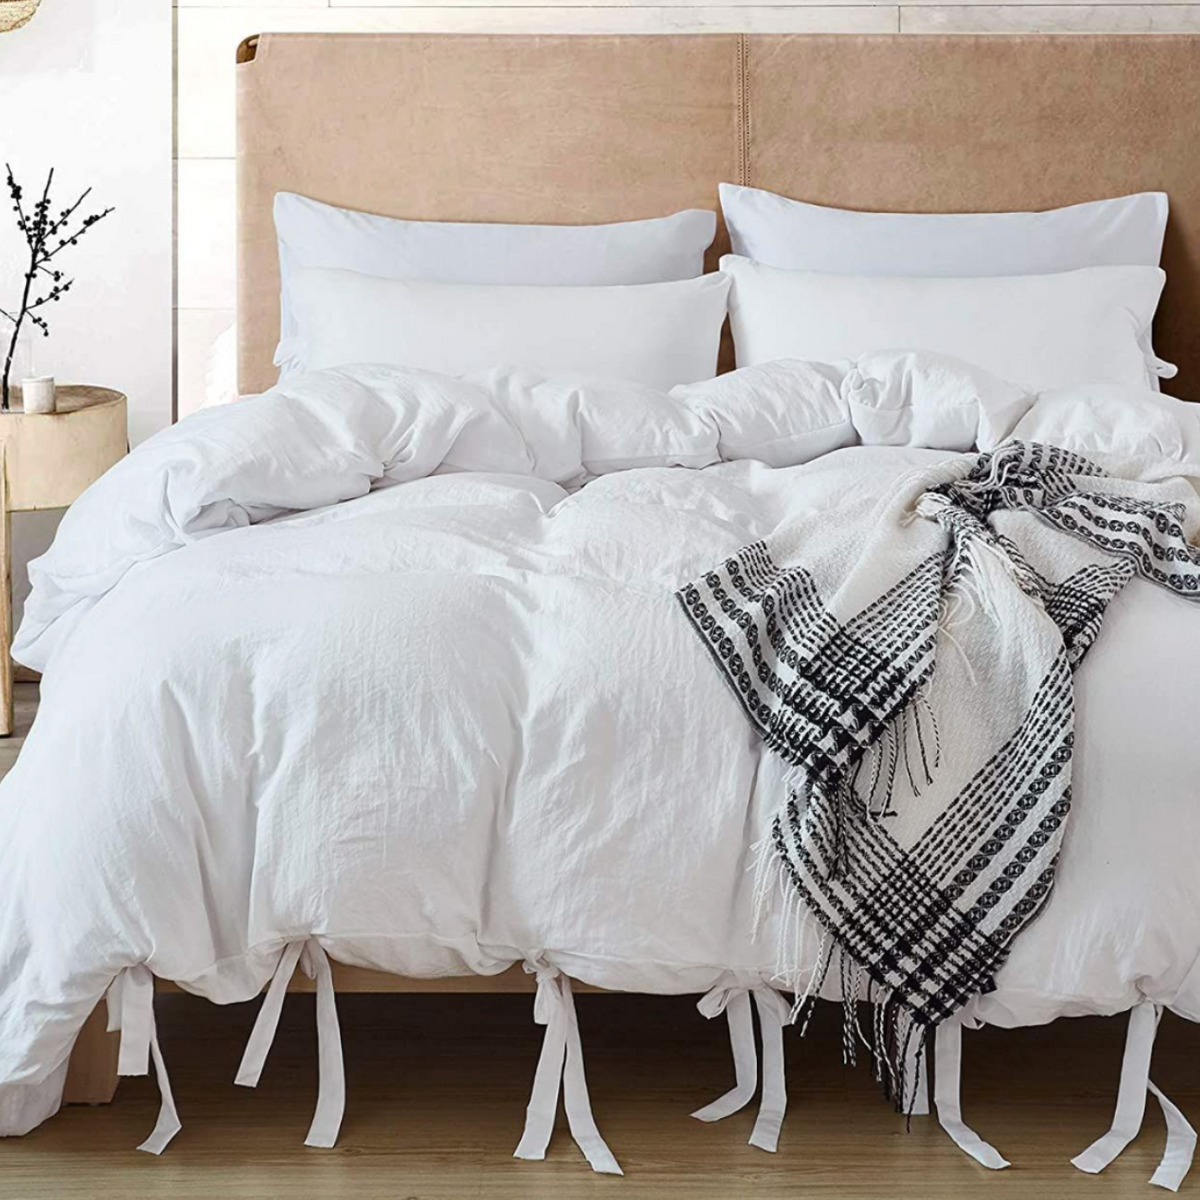 20 Best Duvet Covers 2022 The Strategist, How To Add Ties Duvet